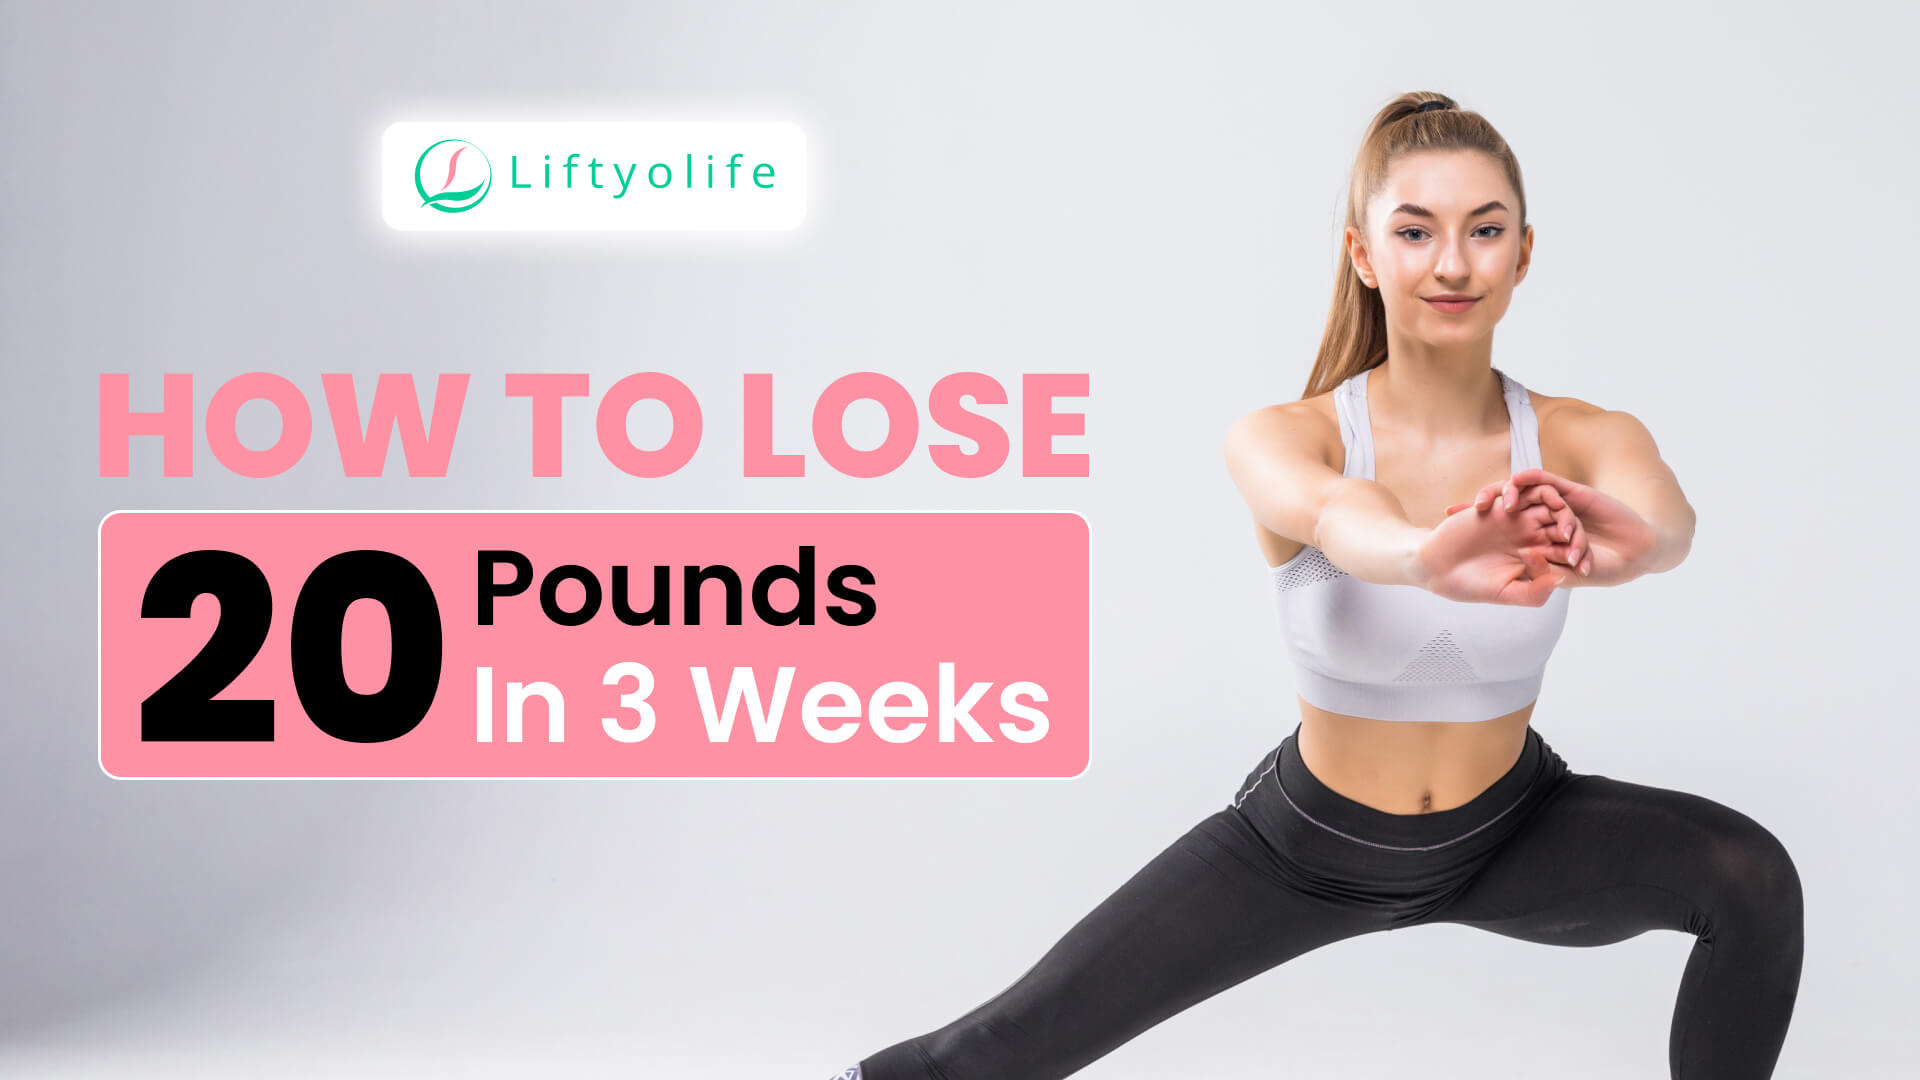 How To Lose 20 Pounds In 3 Weeks?